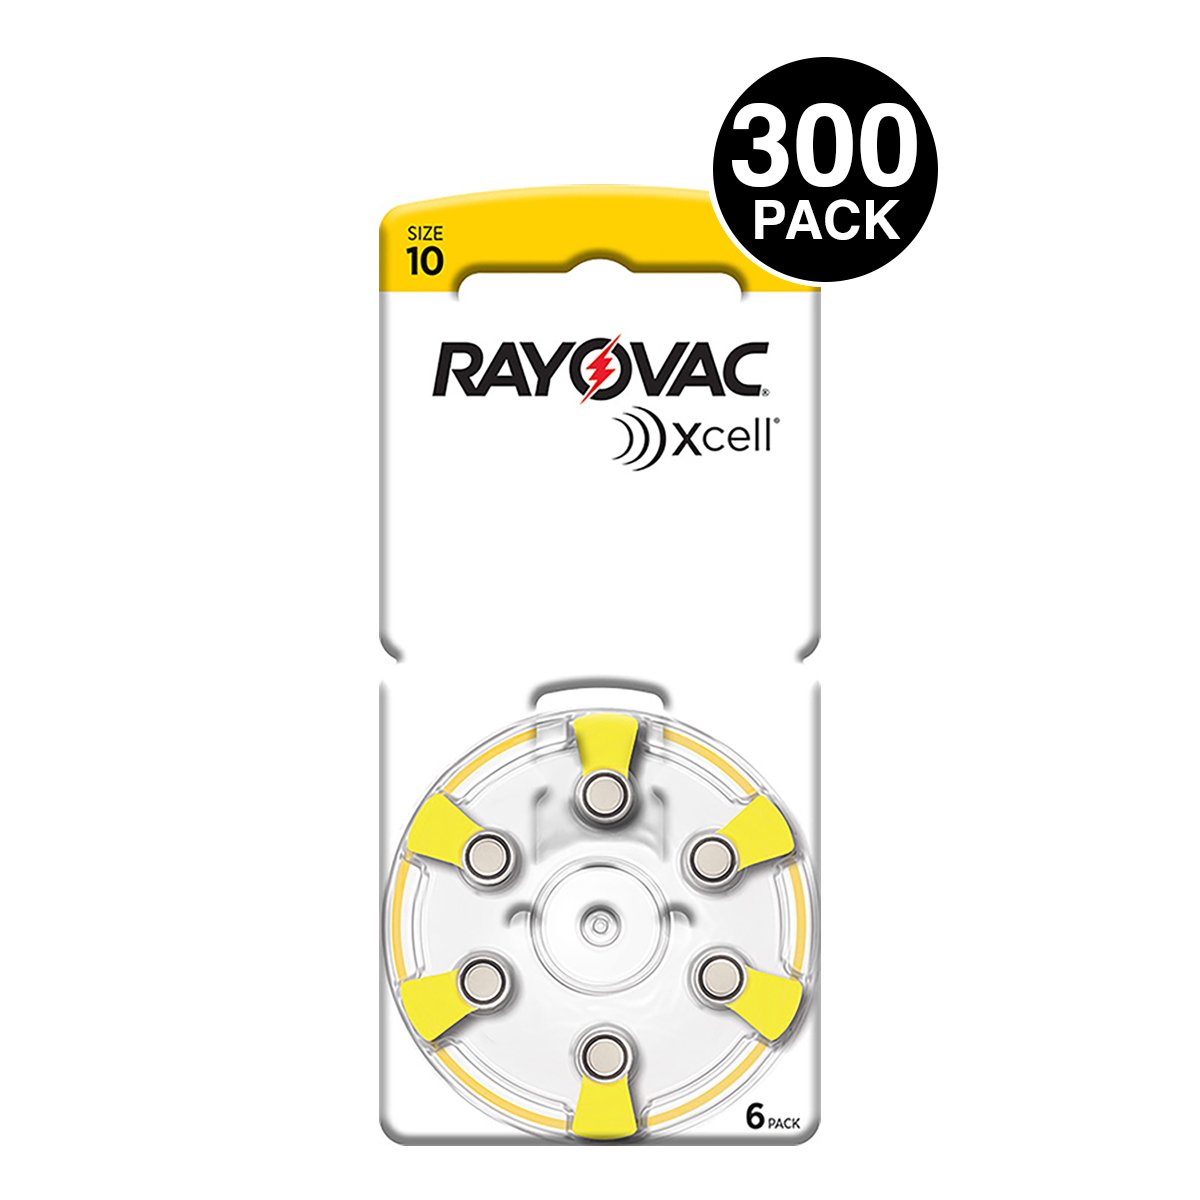 Xcell (Made By Rayovac) Size 10 Hearing Aid Batteries (300 pcs) 